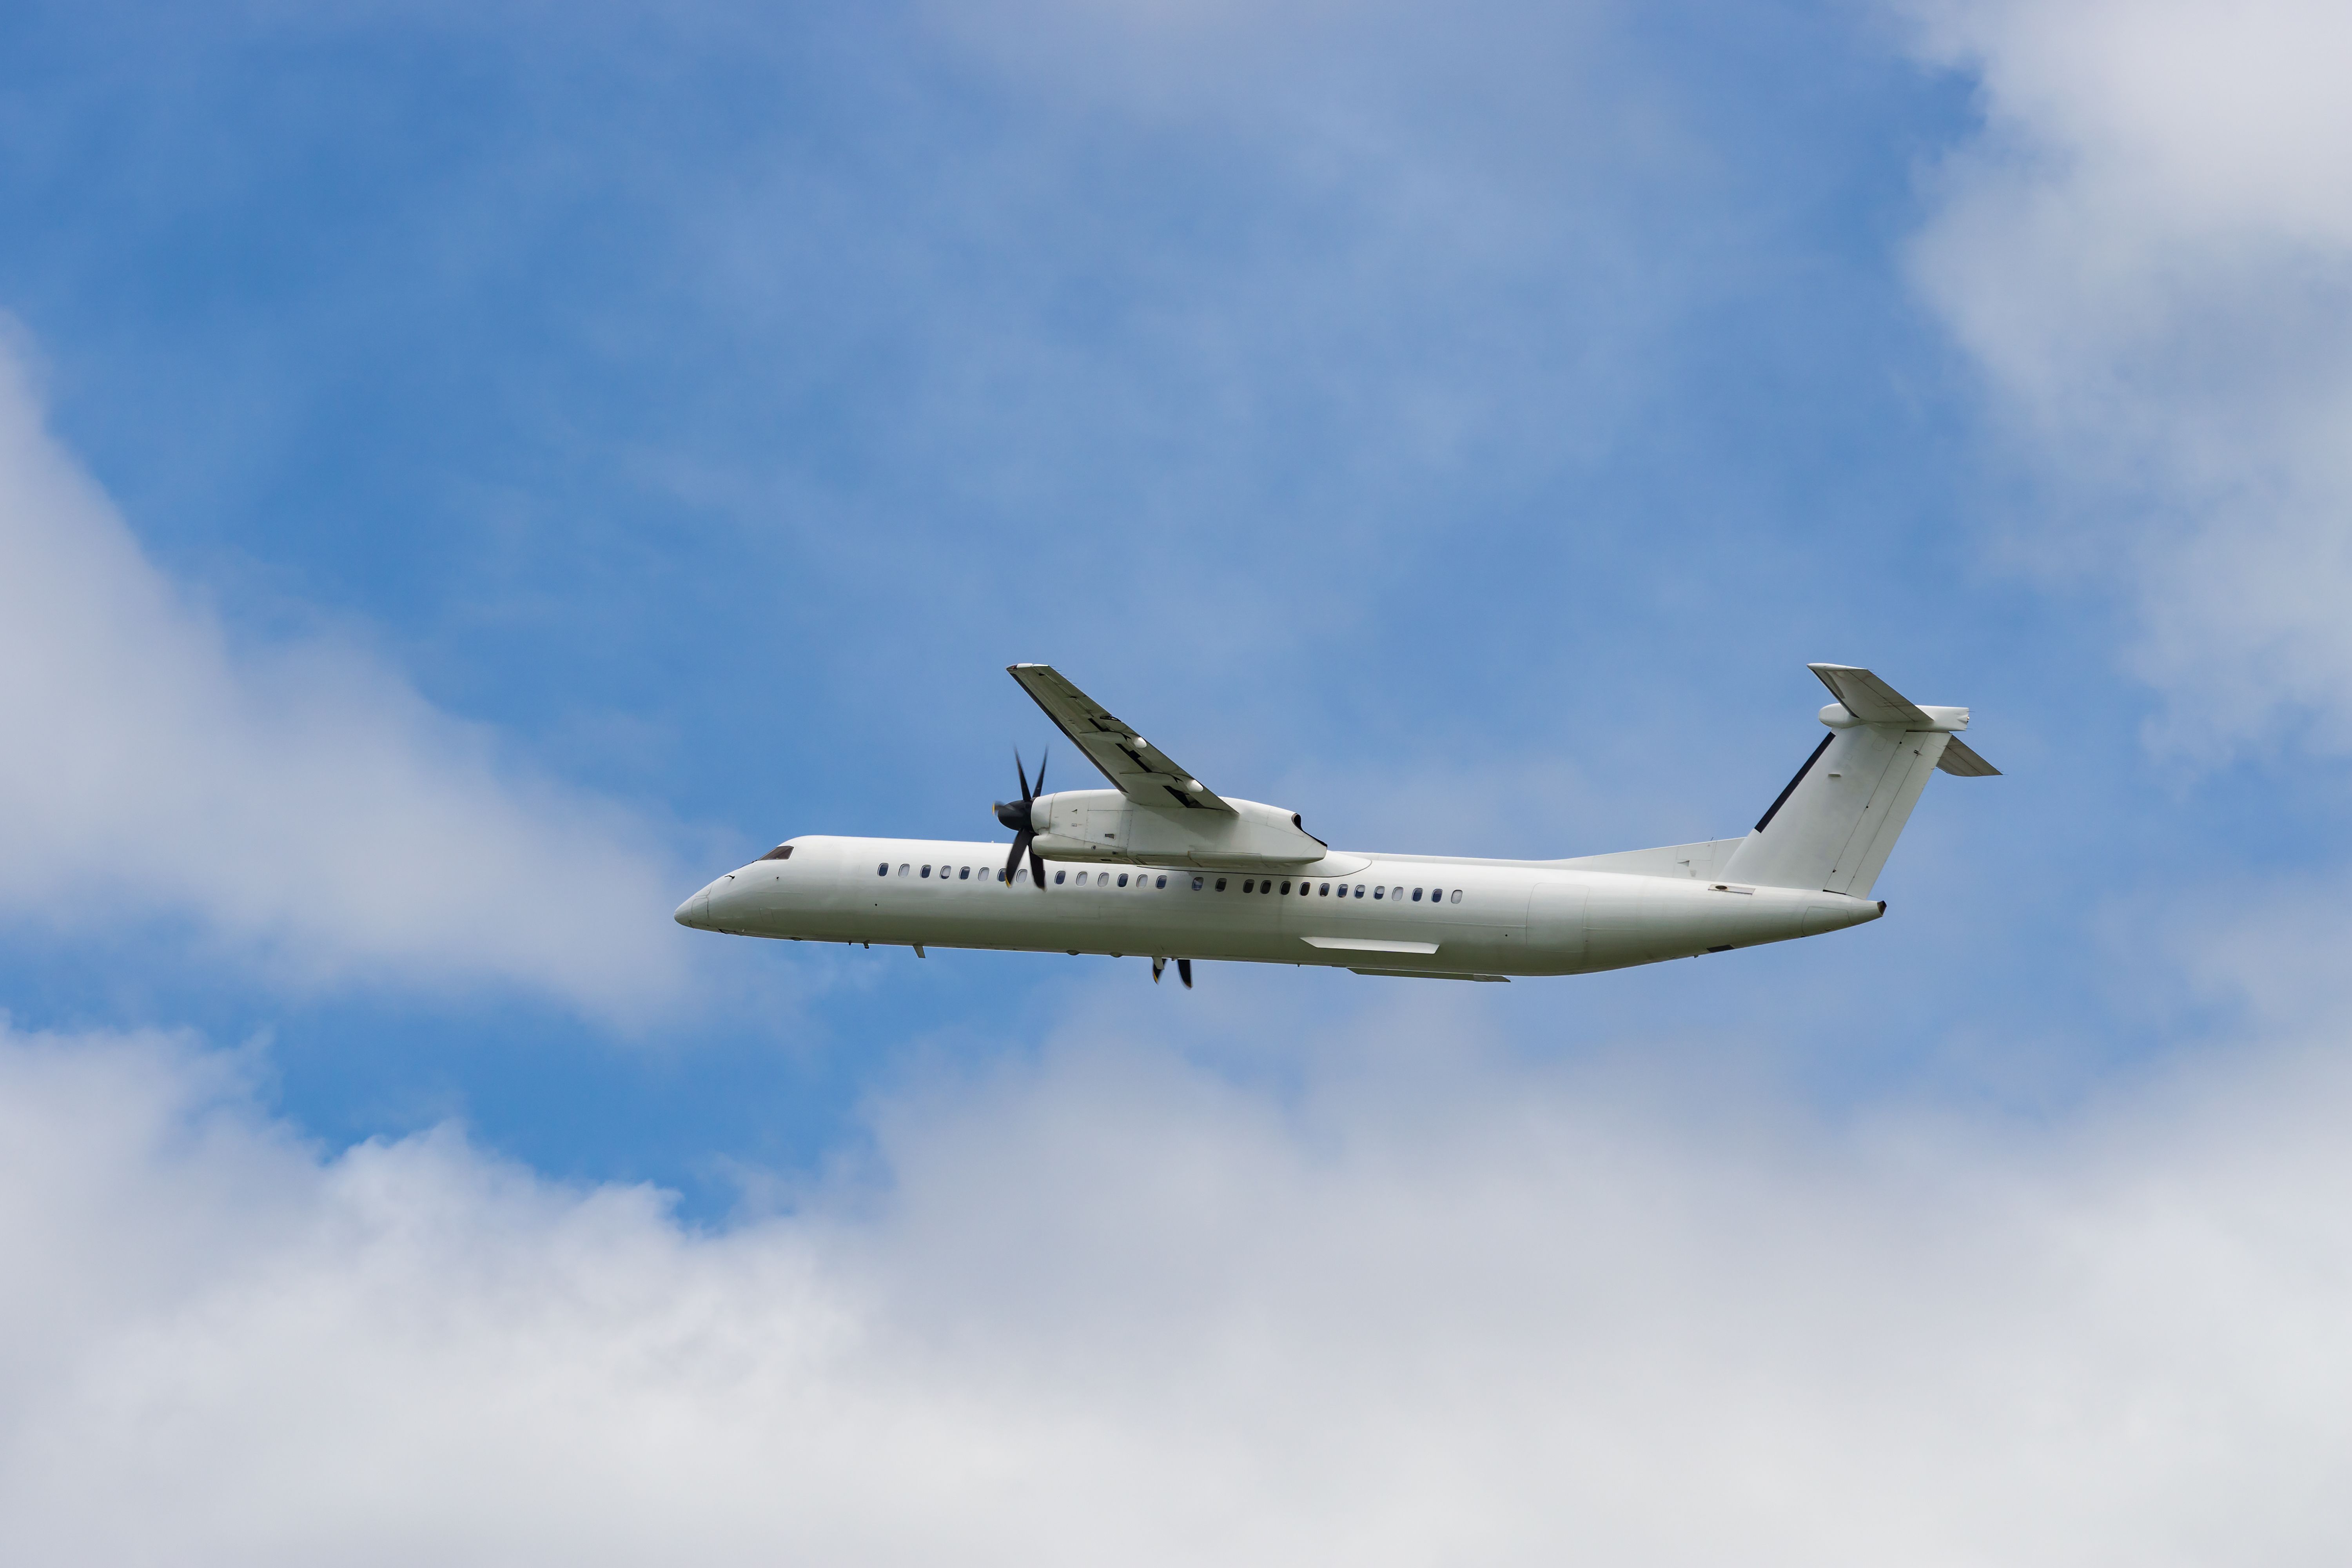 White Dash 8 turboprop aircraft taking off from airport. 